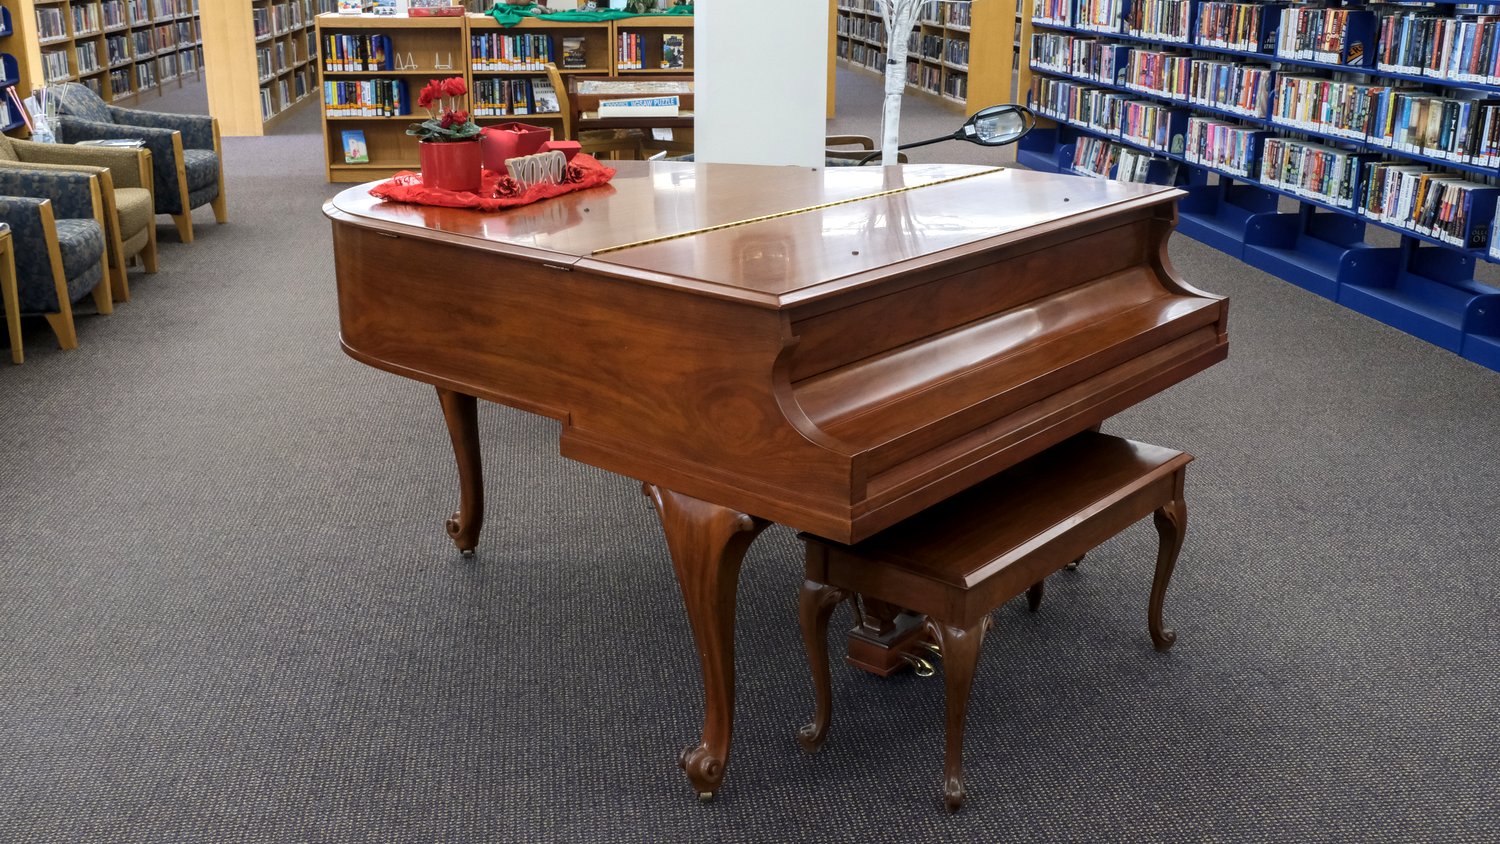 Baby grand piano near the entrance of the Woodstock Public Library.